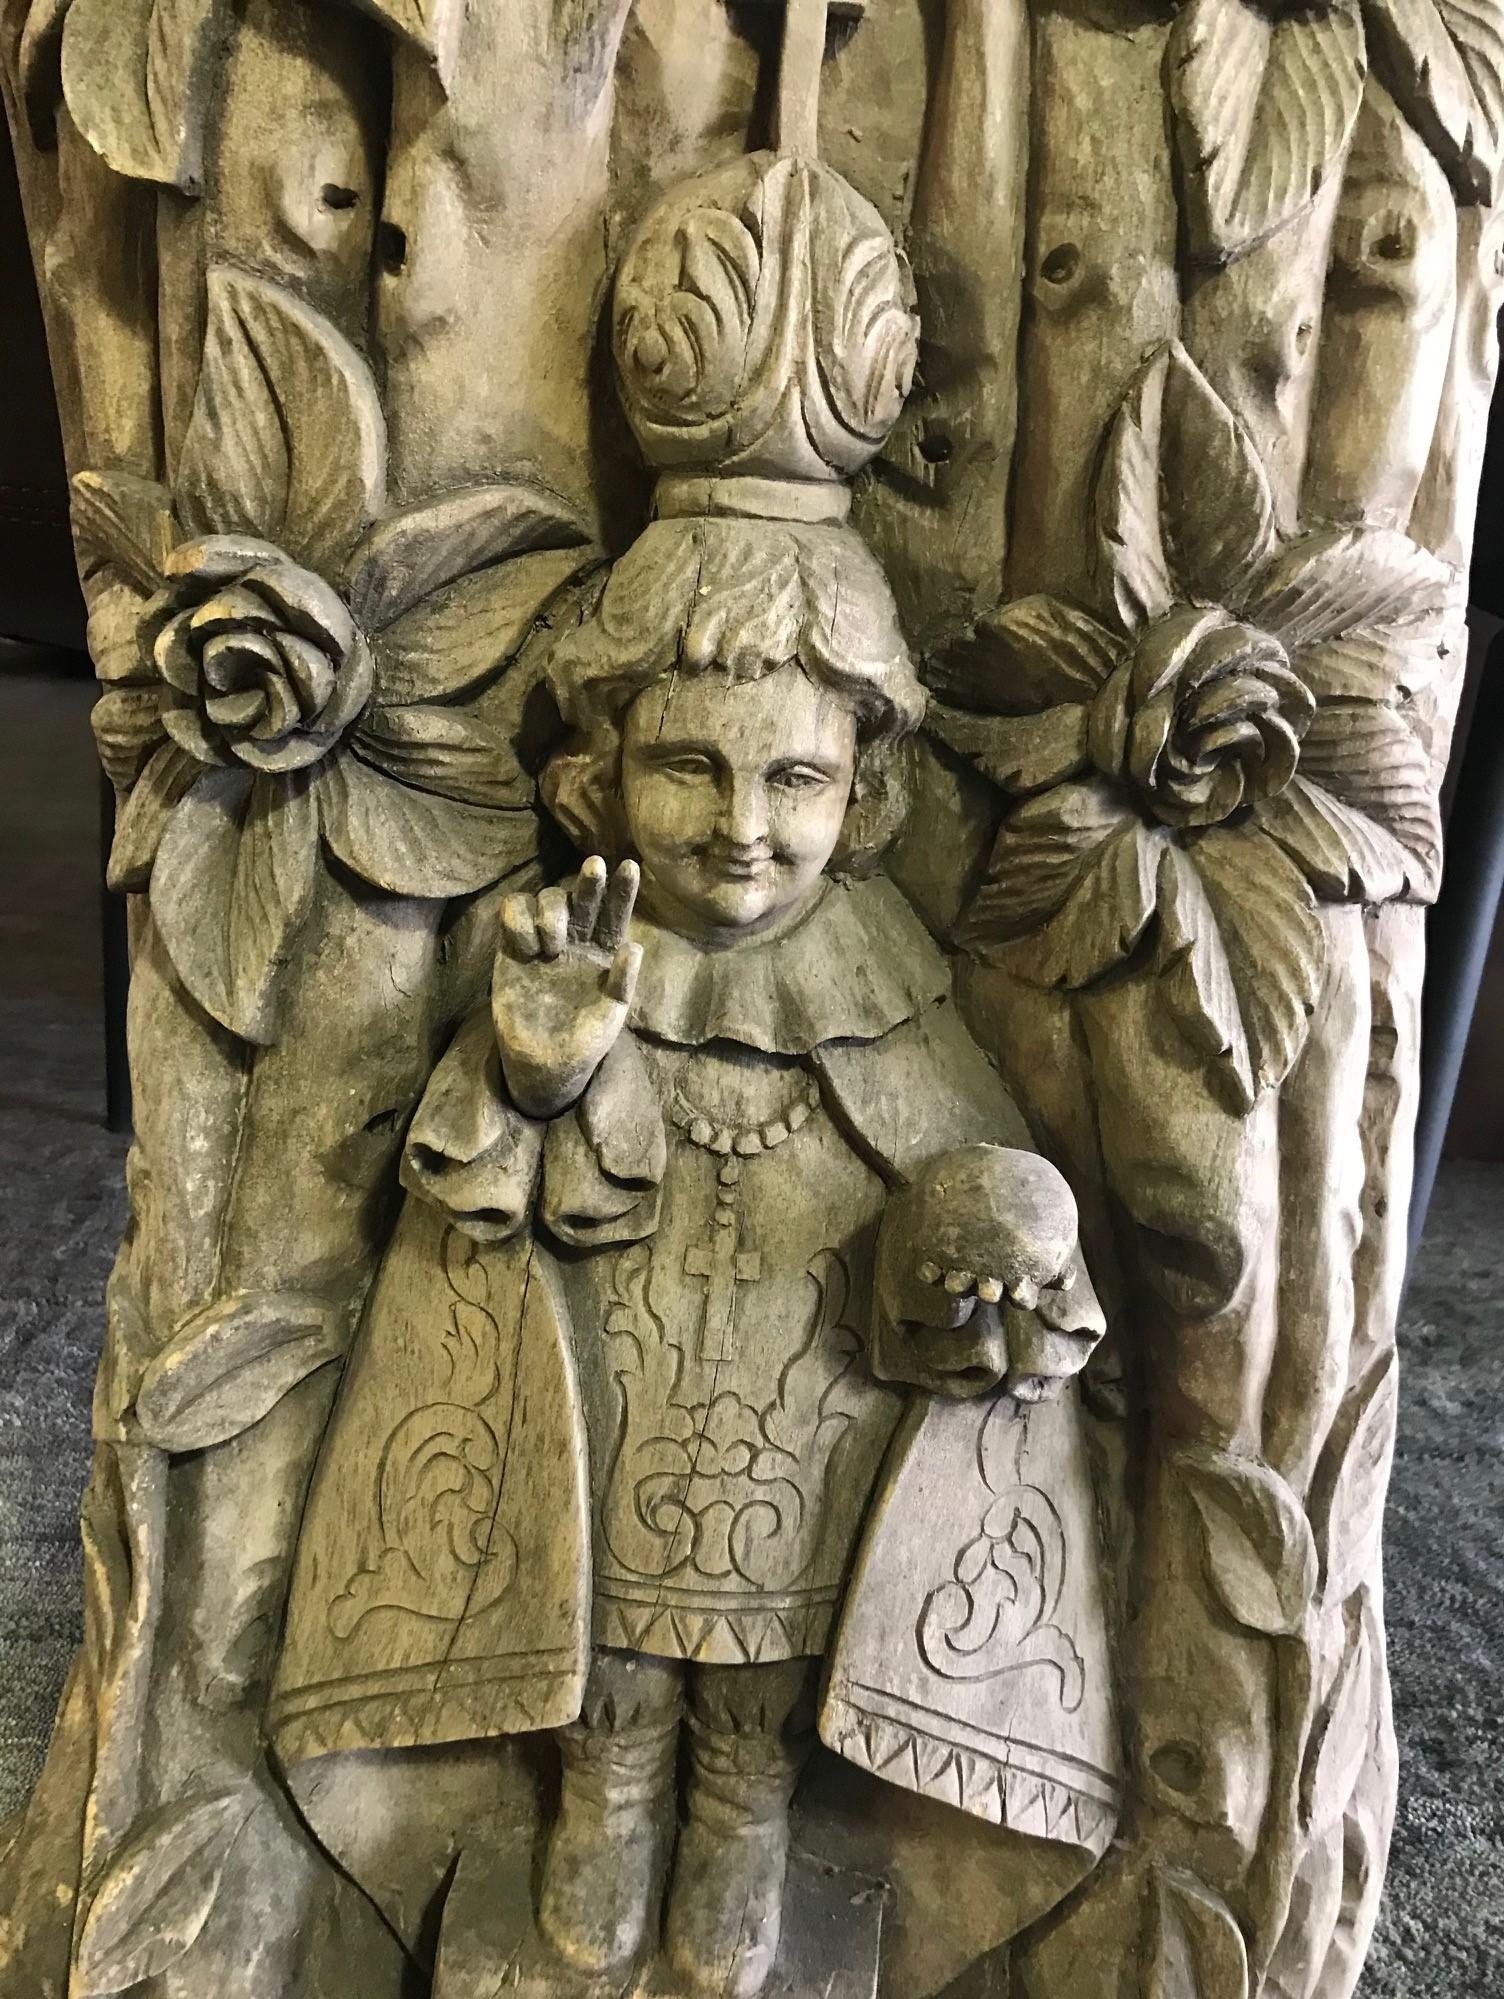 A wonderful, intricately carved, heavy work depicting a religious figure, likely a catholic saint offering his blessing (We have been told that this may be the Holy Infant of Prague (Santo Nino de Praga) or the Infant Jesus of Prague. This piece was